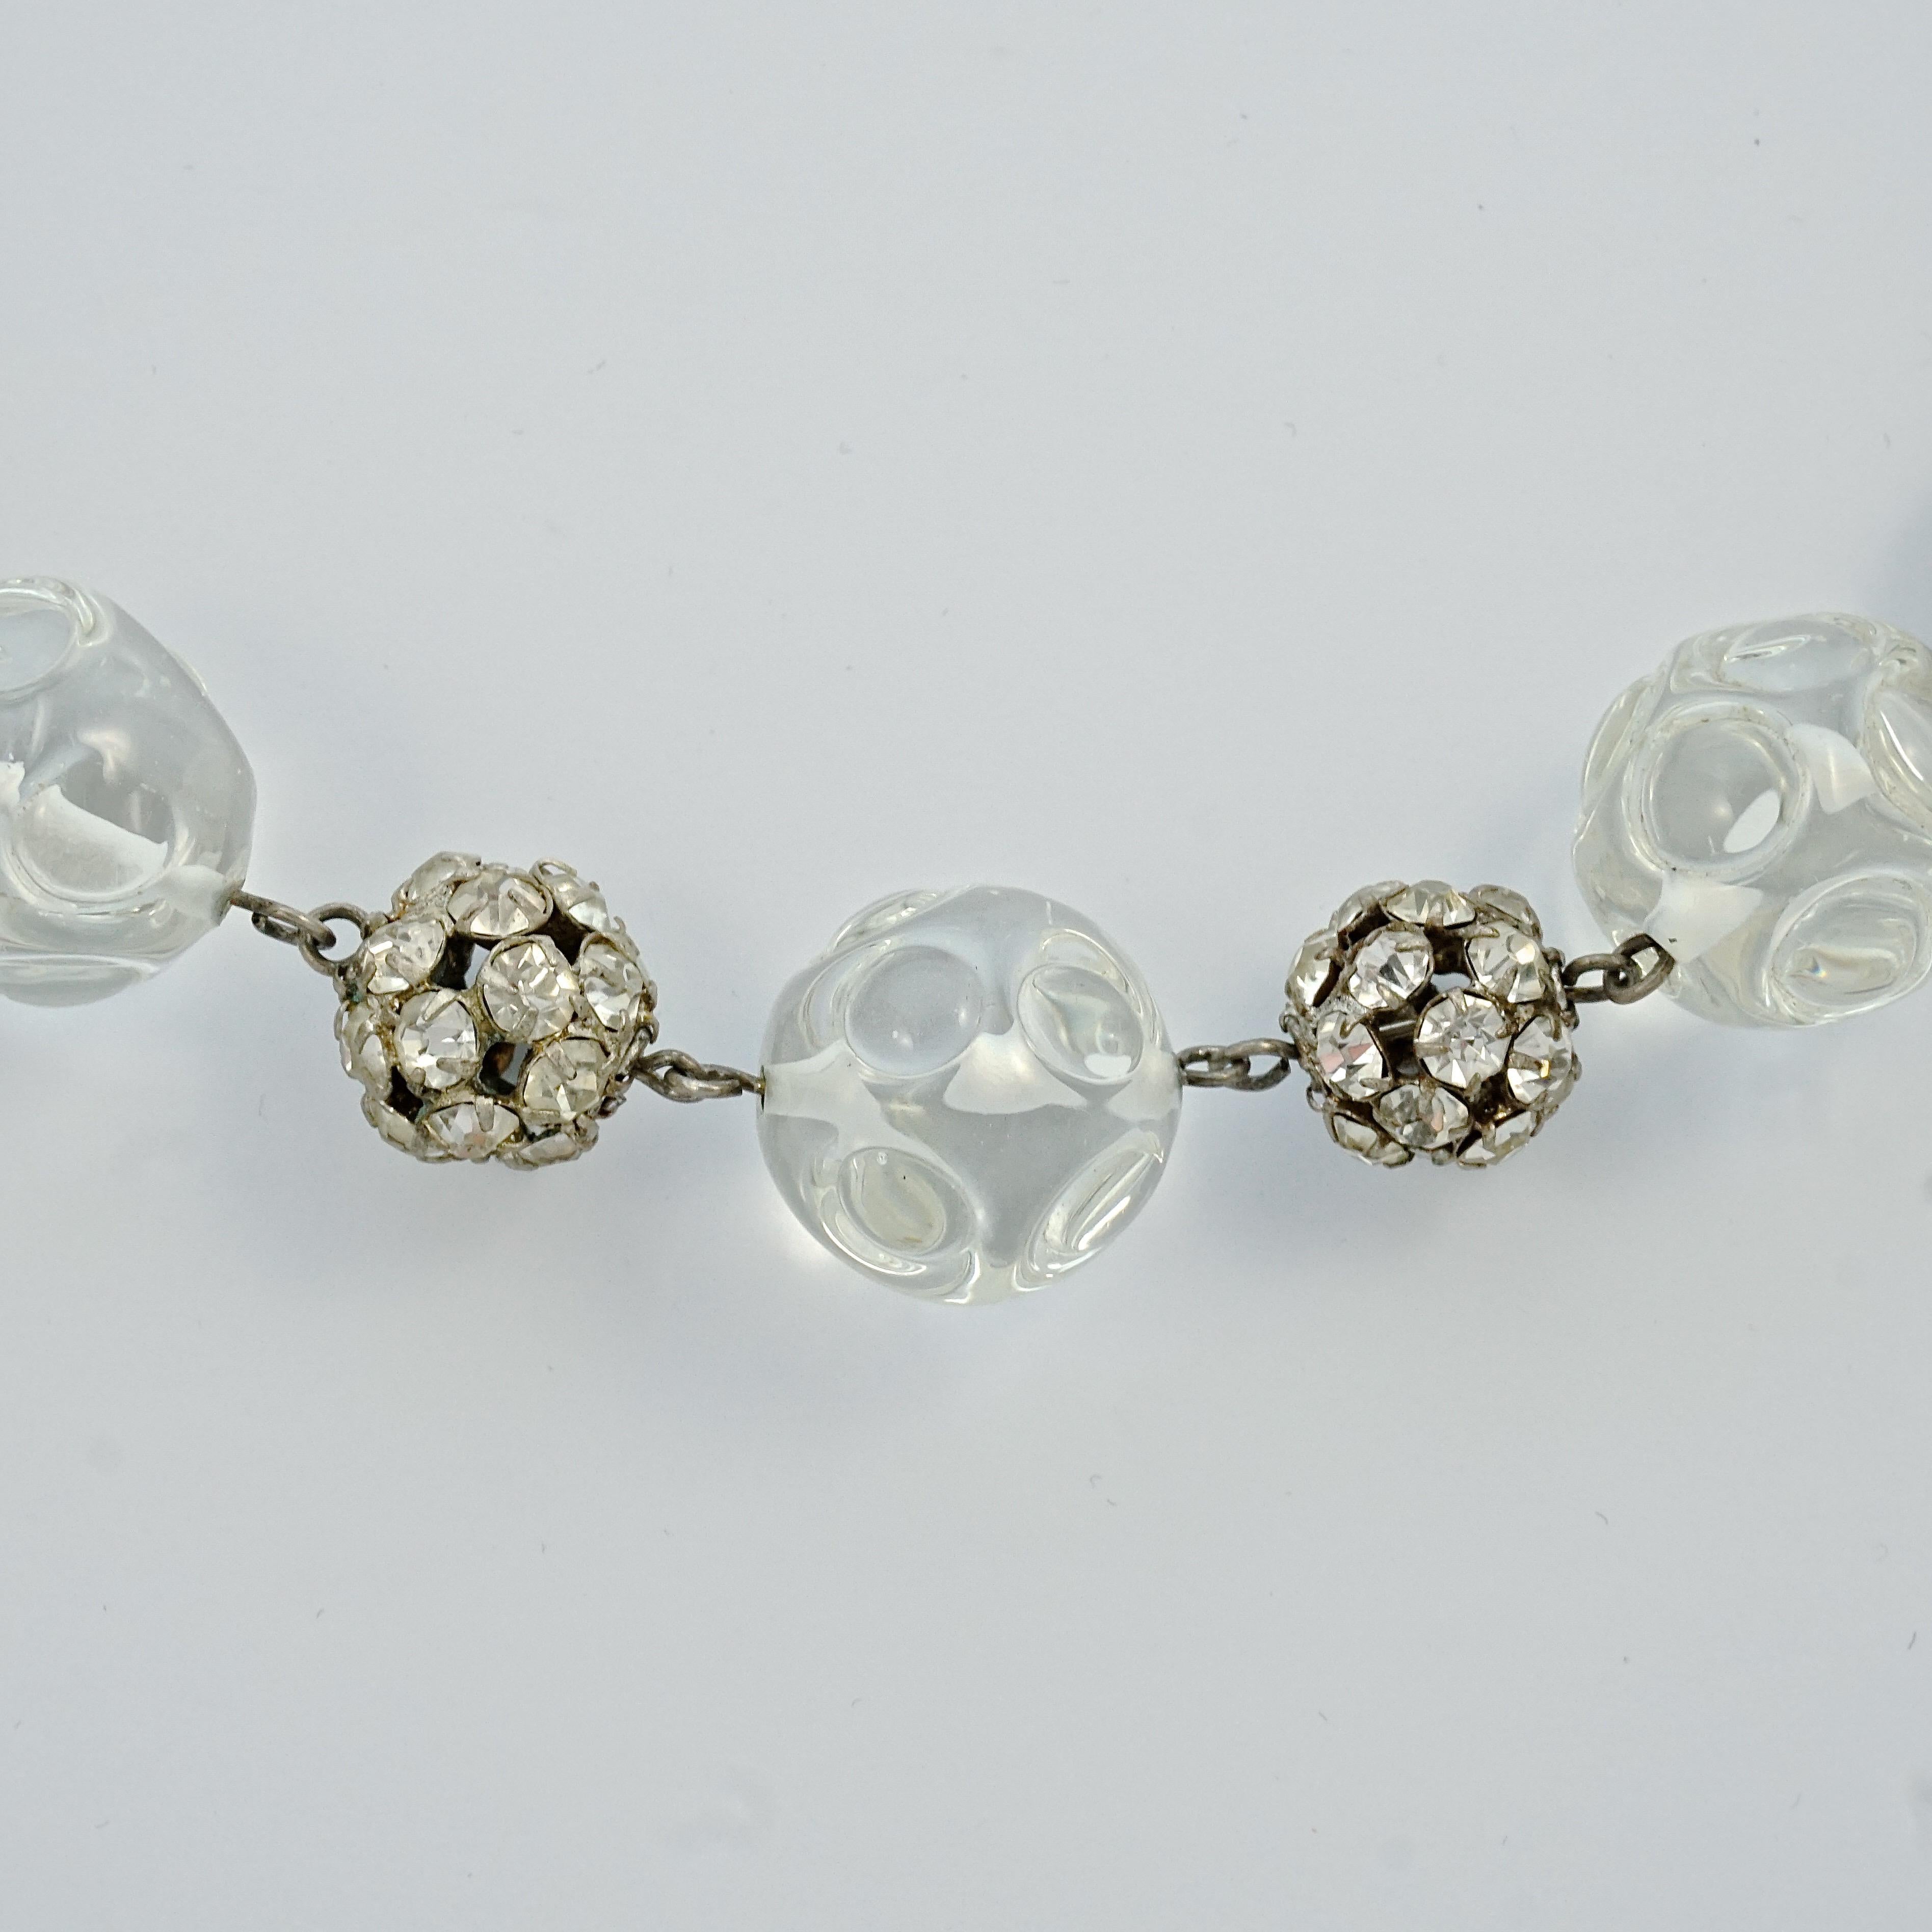 Fabulous Art Deco silver tone necklace featuring clear glass ball beads with an embossed circle design, and rhinestone balls. Length 43.7cm / 17.2 inches, and the clear glass beads are 1.8cm / .7 inches. The necklace is in very good condition.

This